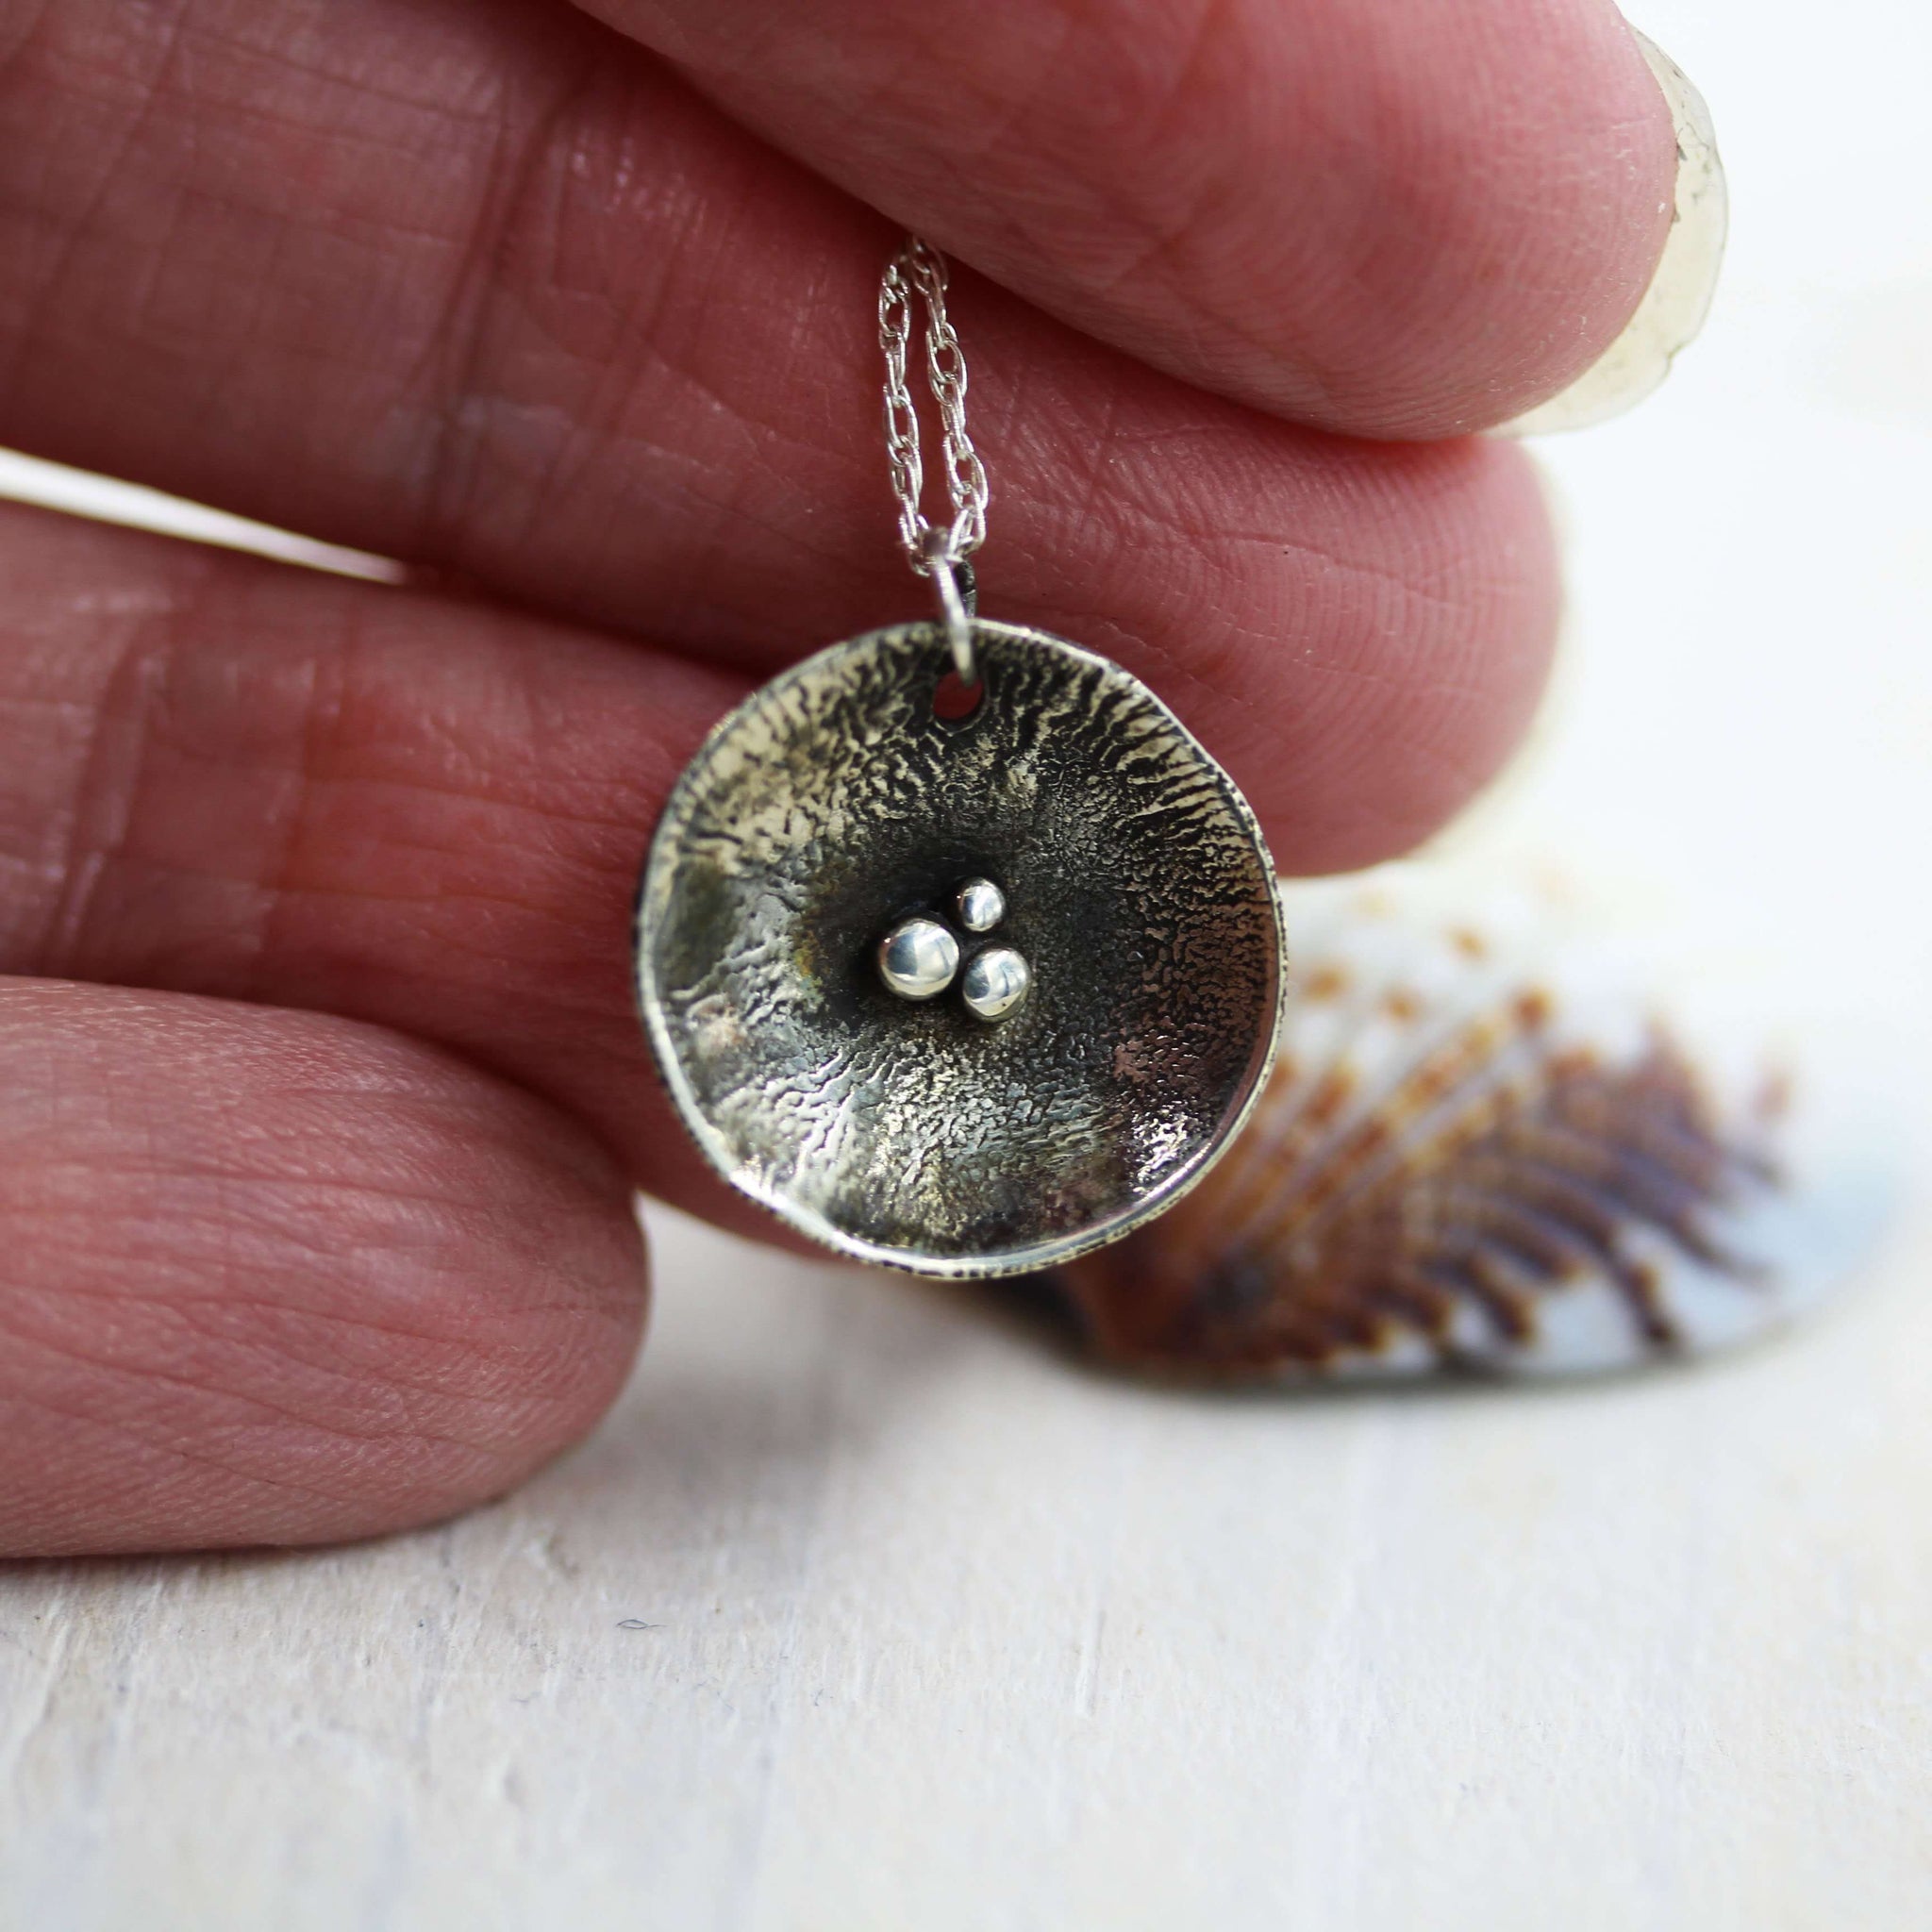 Handcrafted Pebbles on the Beach necklace, inspired by the pebbley shorelines of Suffolk and handmade in Sterling Silver 